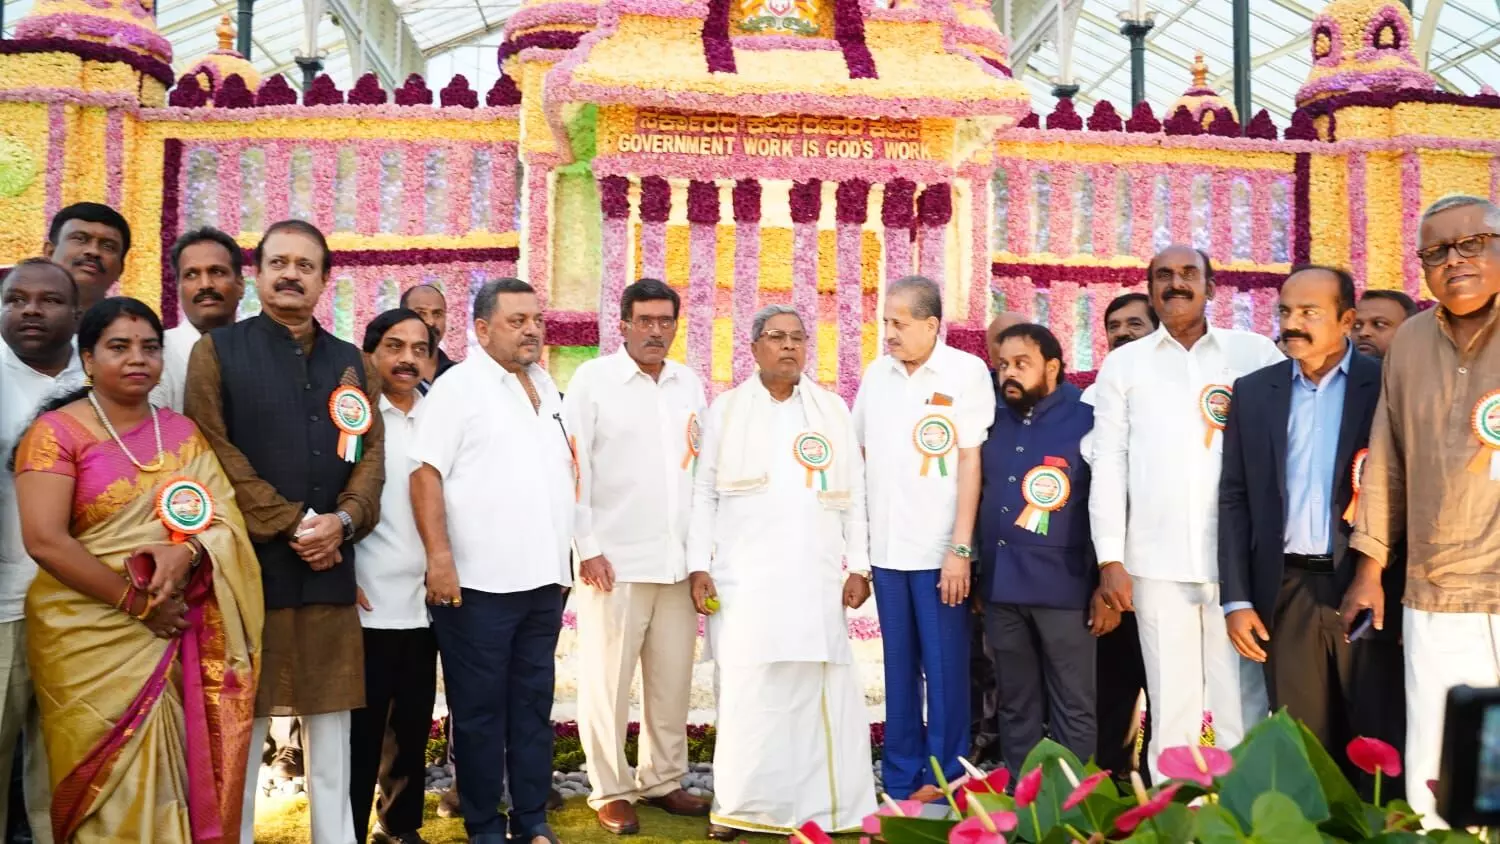 Chief Minister inaugurates Independence Day flower show at Lal Bagh